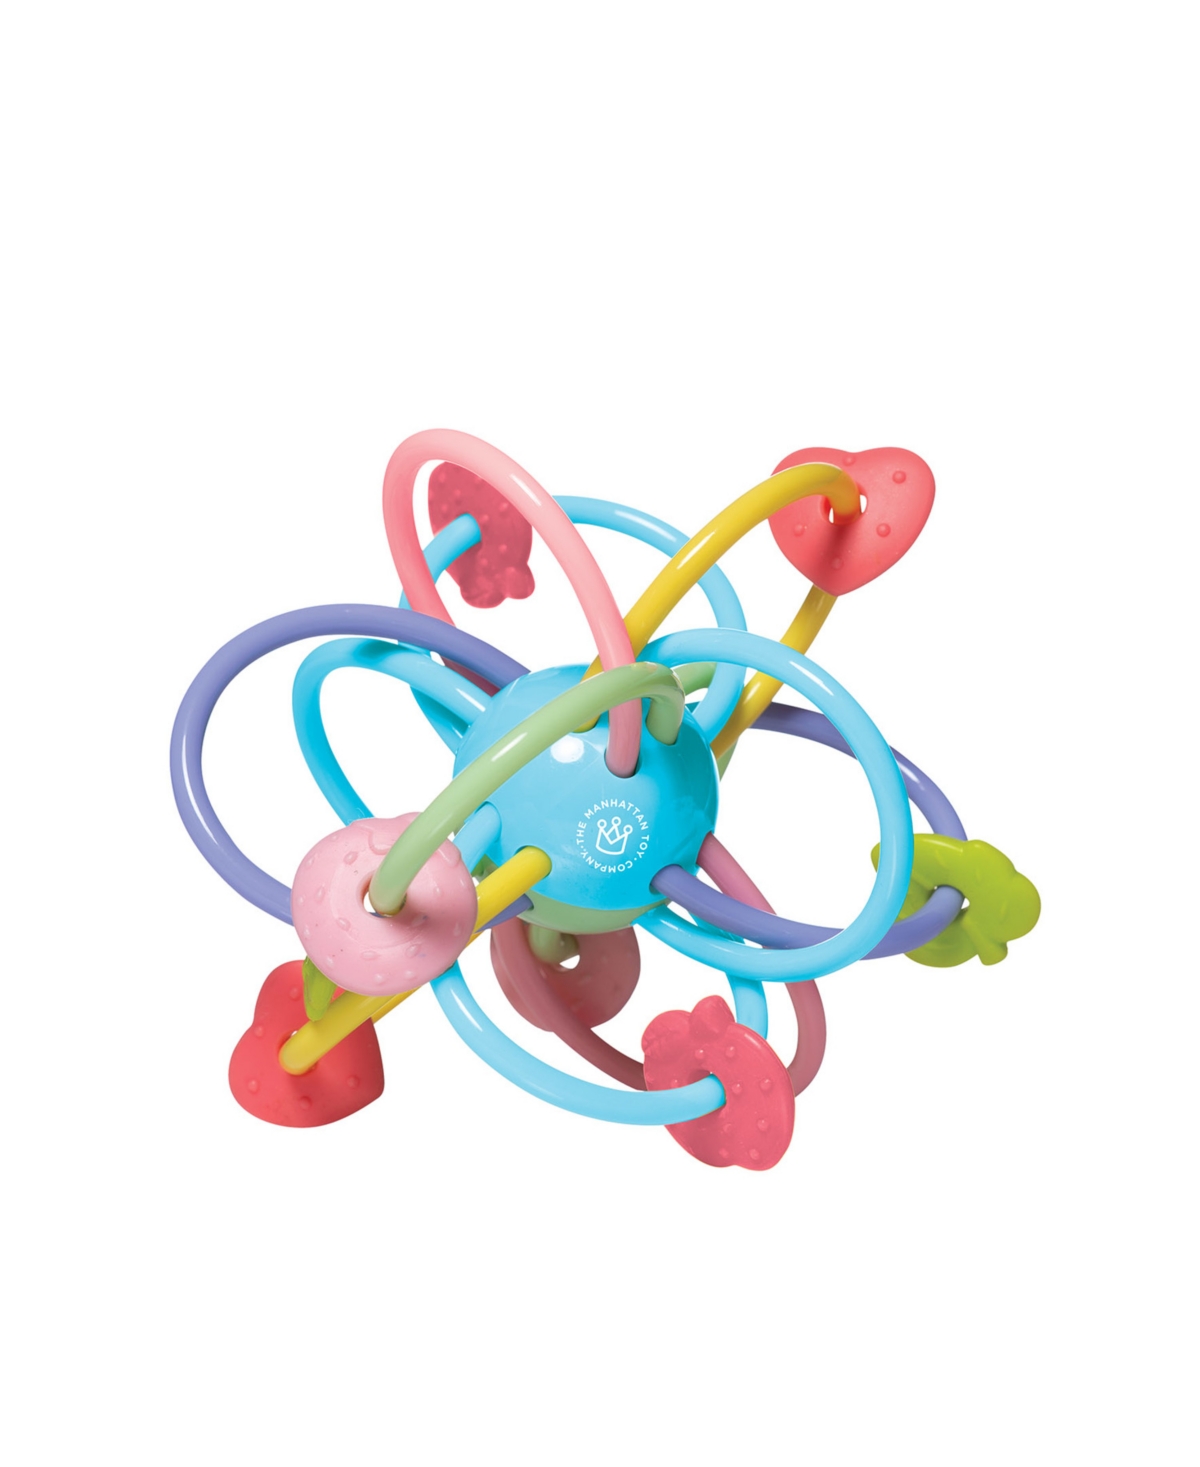 Manhattan Toy Company Kids' Manhattan Ball Rattle And Sensory Teether Toy Boxed In Multicolor